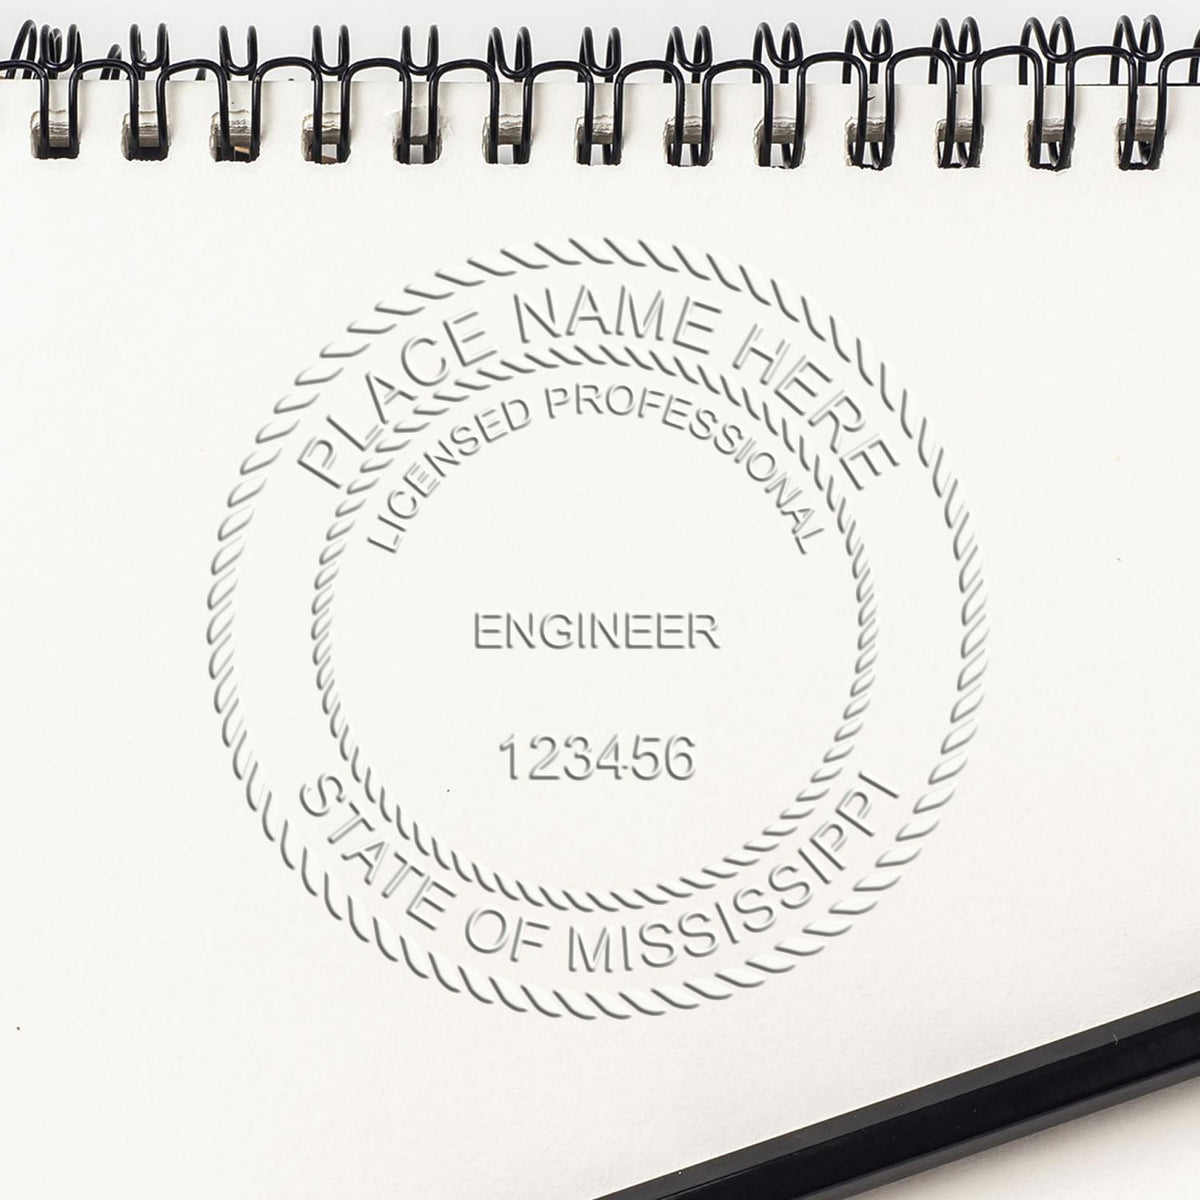 A stamped imprint of the Gift Mississippi Engineer Seal in this stylish lifestyle photo, setting the tone for a unique and personalized product.